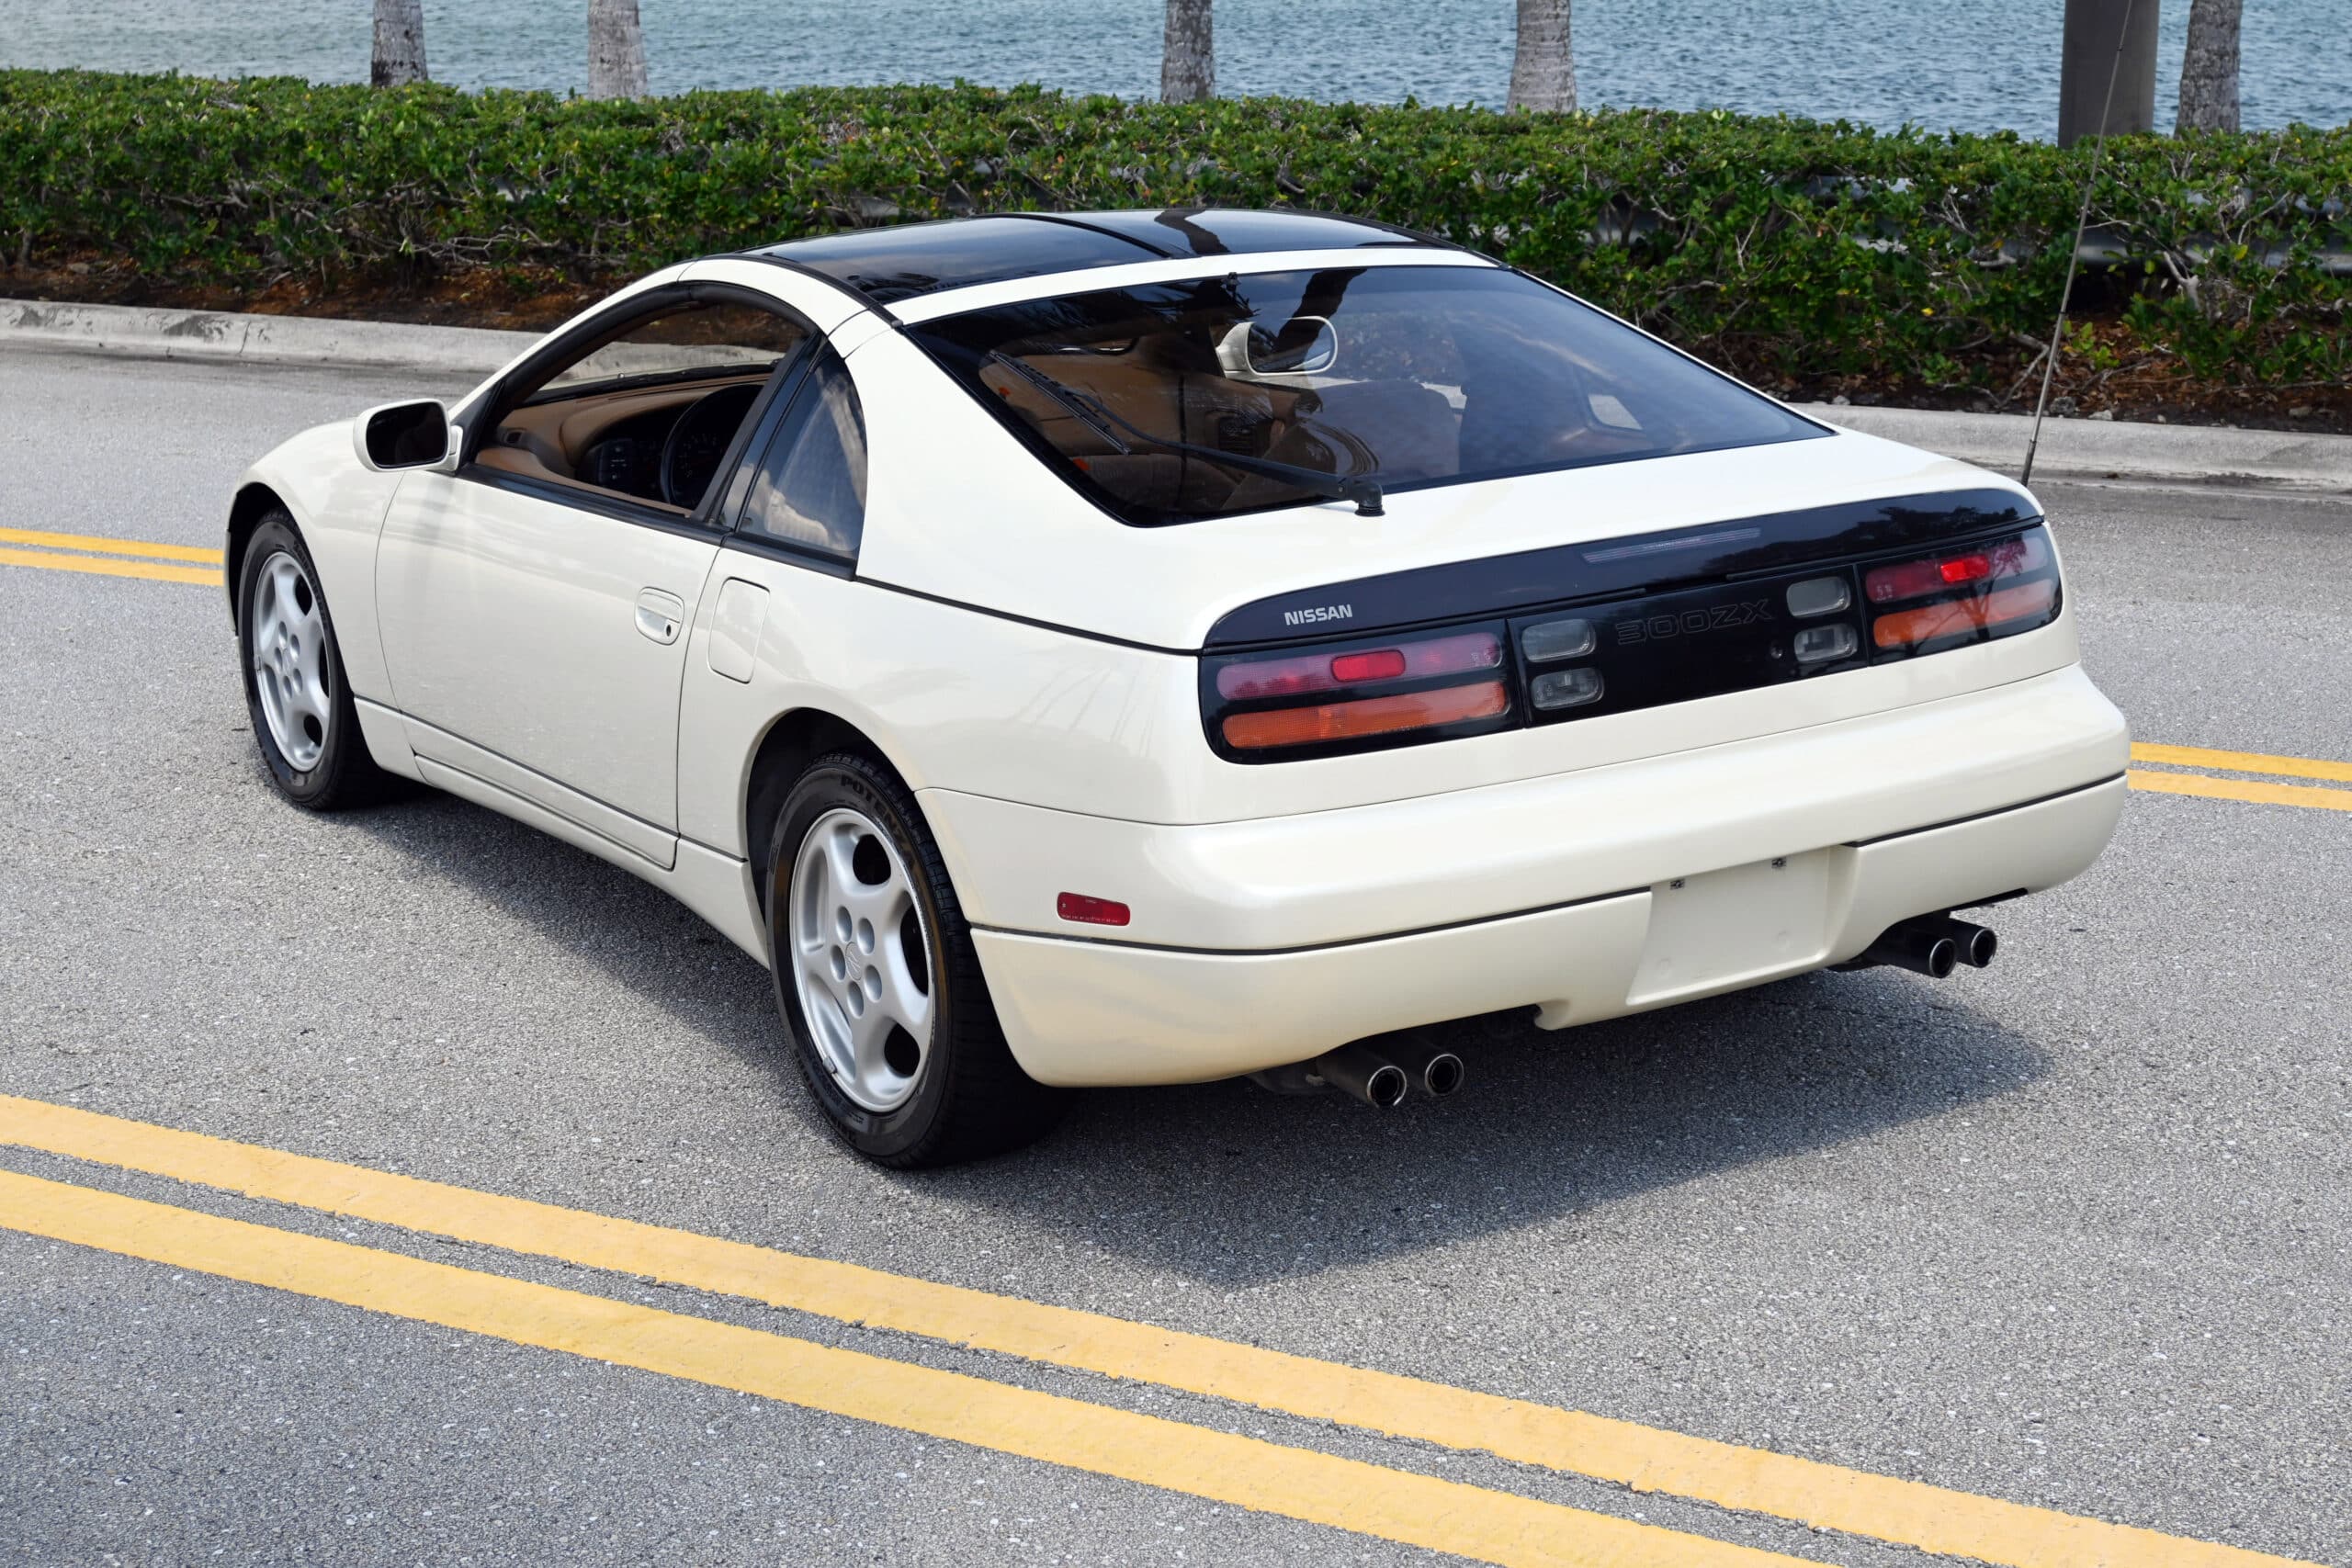 1994 Nissan 300ZX, One owner Garage find! ONLY 50K ACTUAL miles, Rust free Nevada time capsule, Manual Transmission, original Pearl White paint